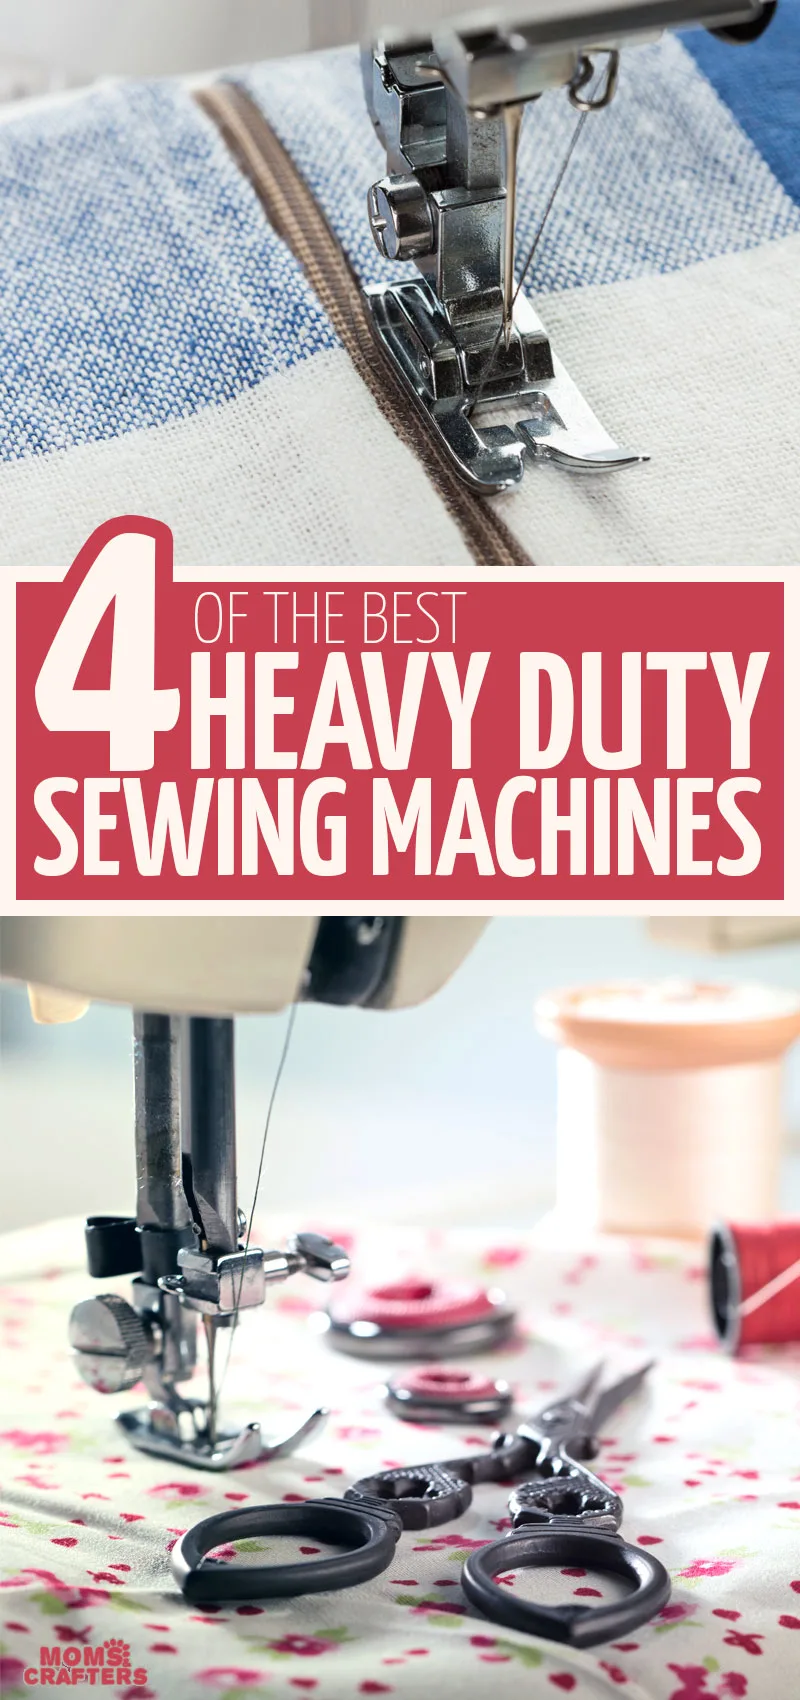 Click for a list of the best heavy duty sewing machine for sewing heavyweight fabrics like denim jeans, burlap, and other industrial fabrics. You'll find more sewing tips for buying a new sewing machine.